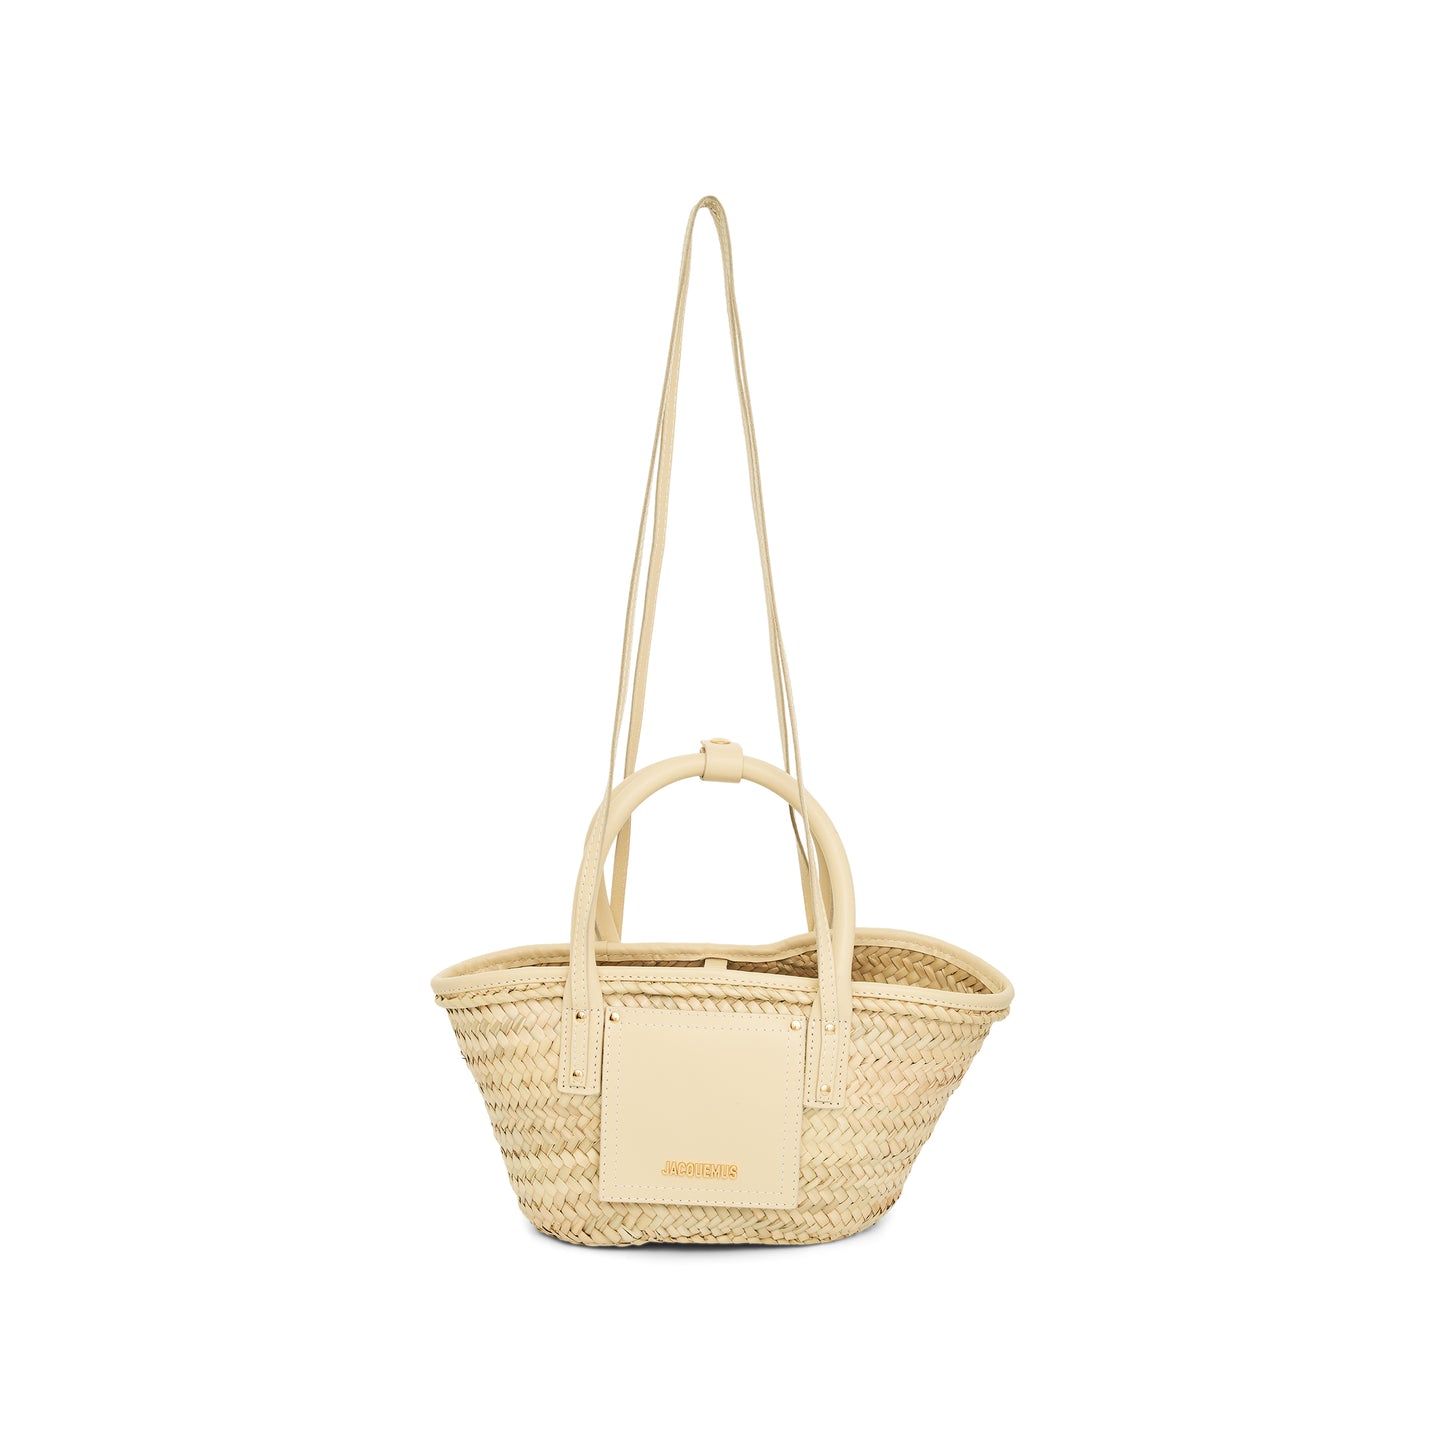 Le Petit Panier Soli Straw & Leather Bag in Ivory